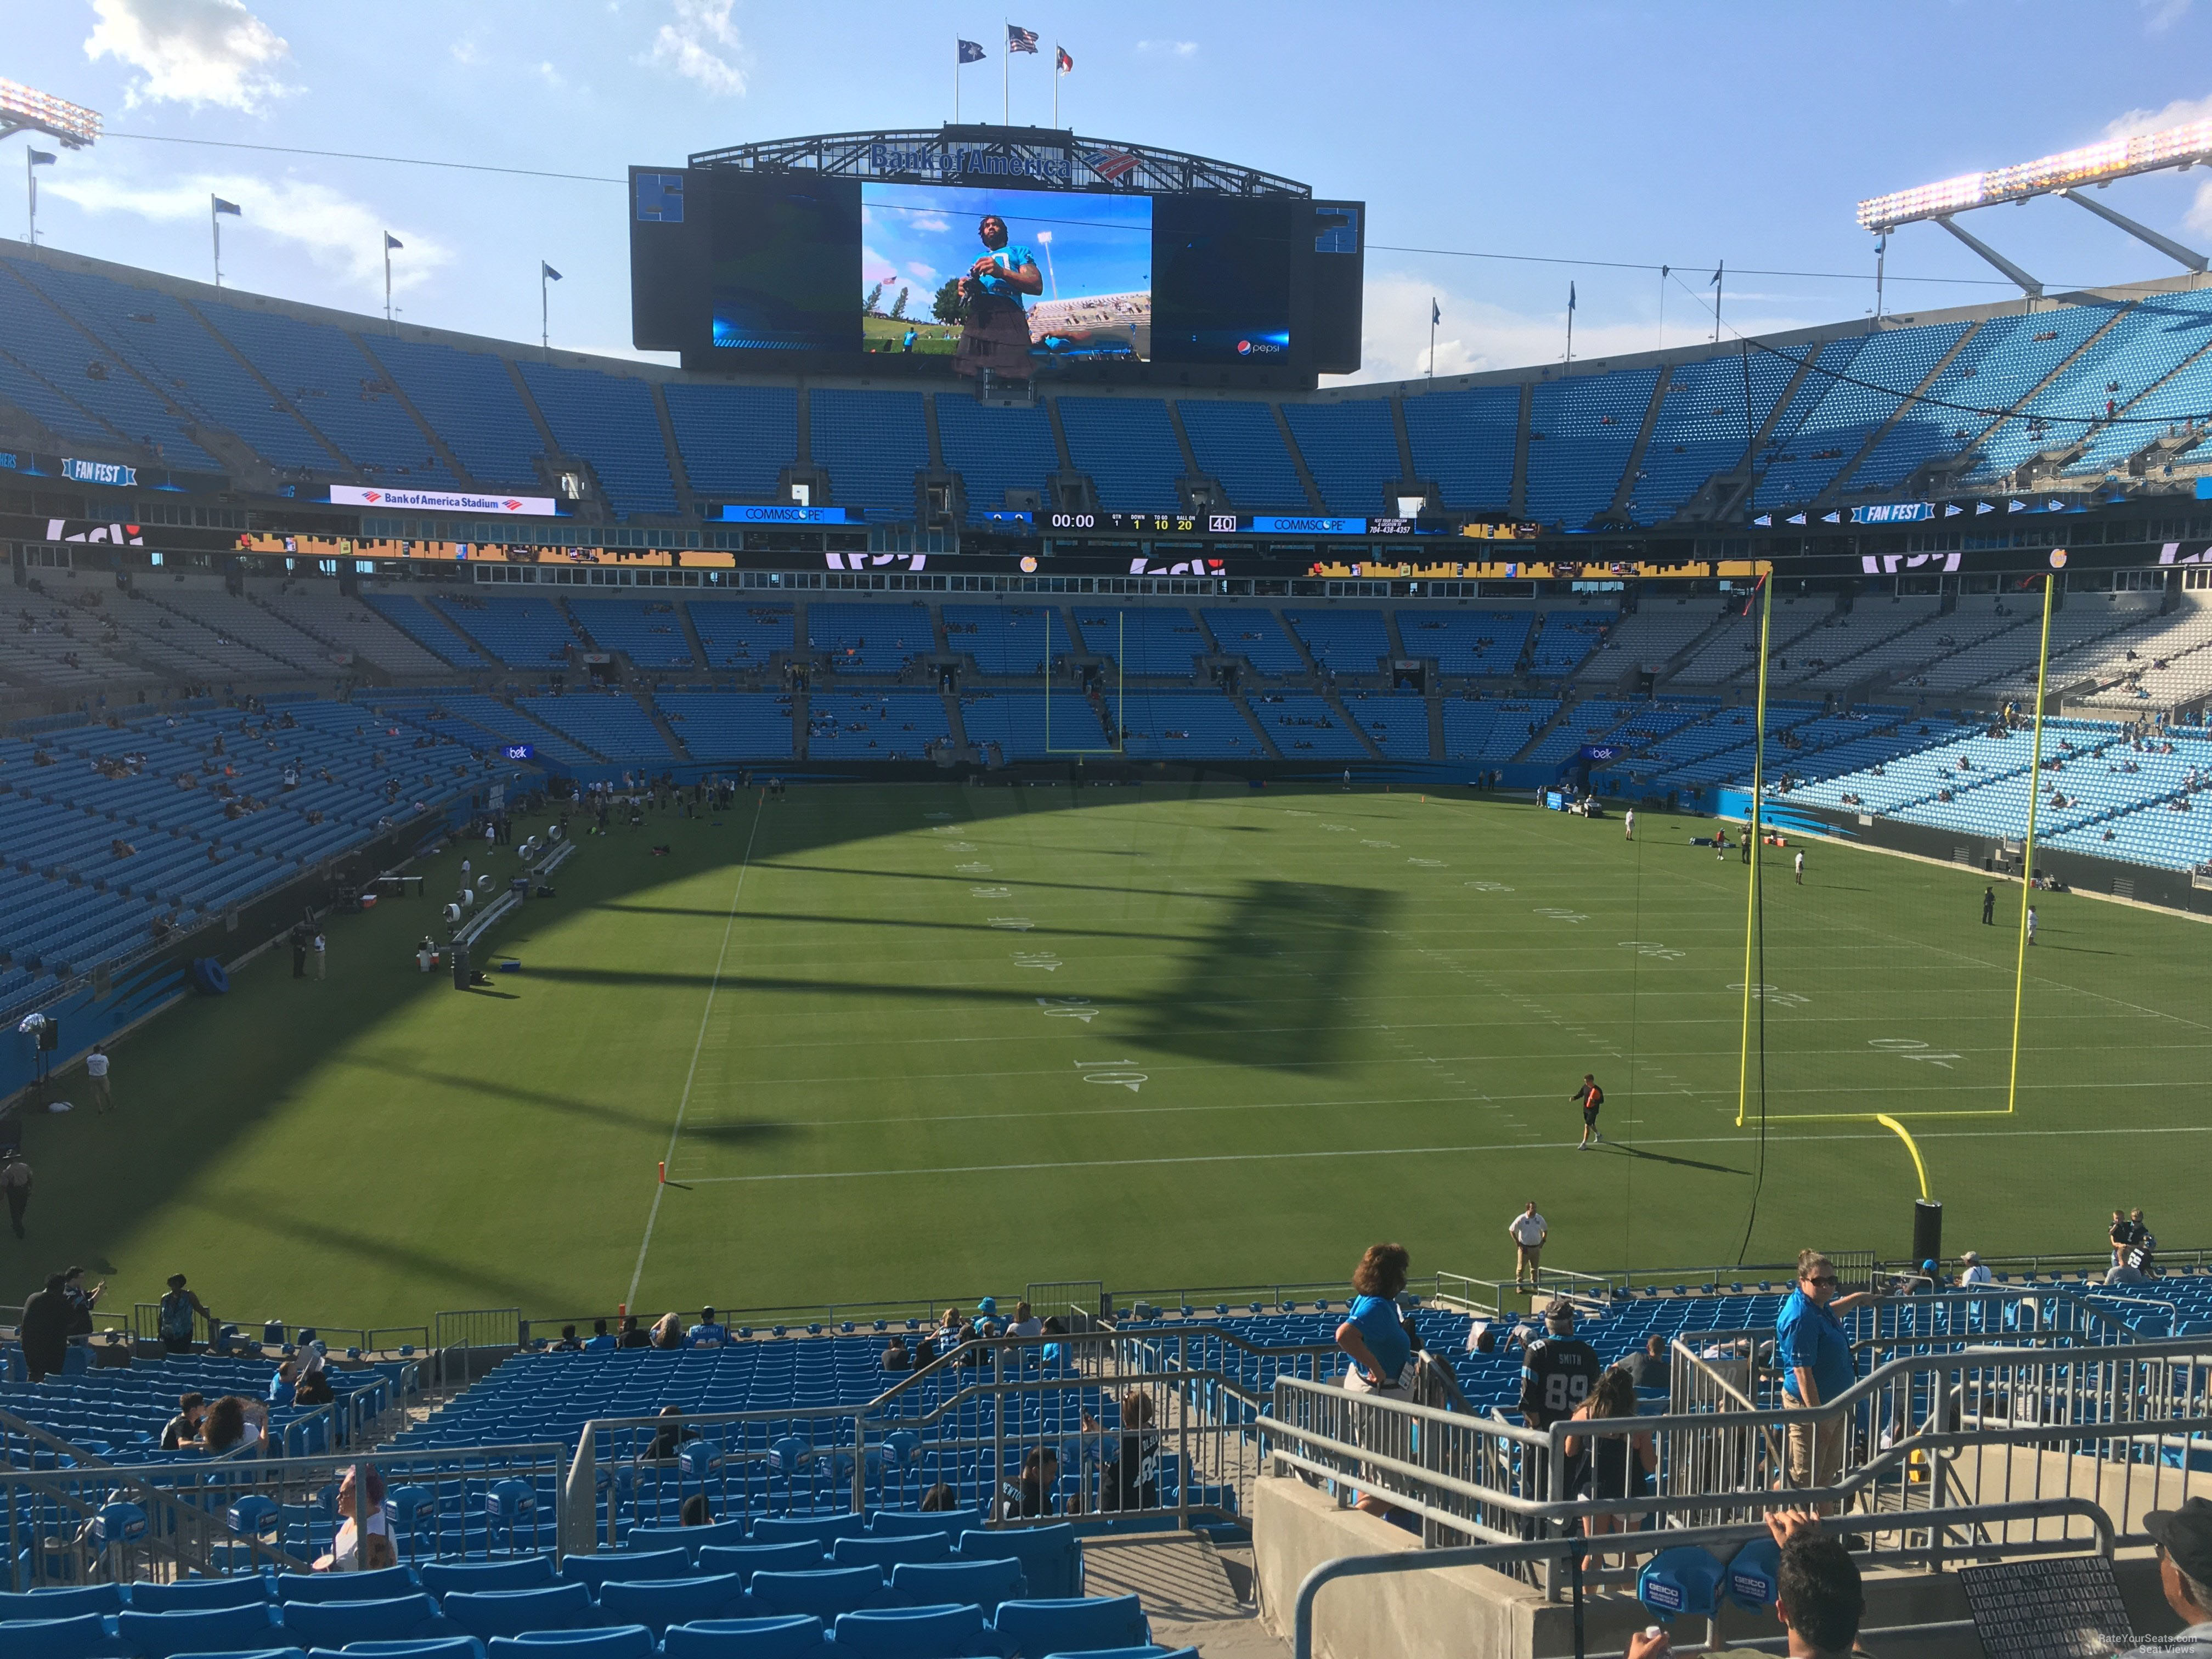 section 231, row 10 seat view  for football - bank of america stadium